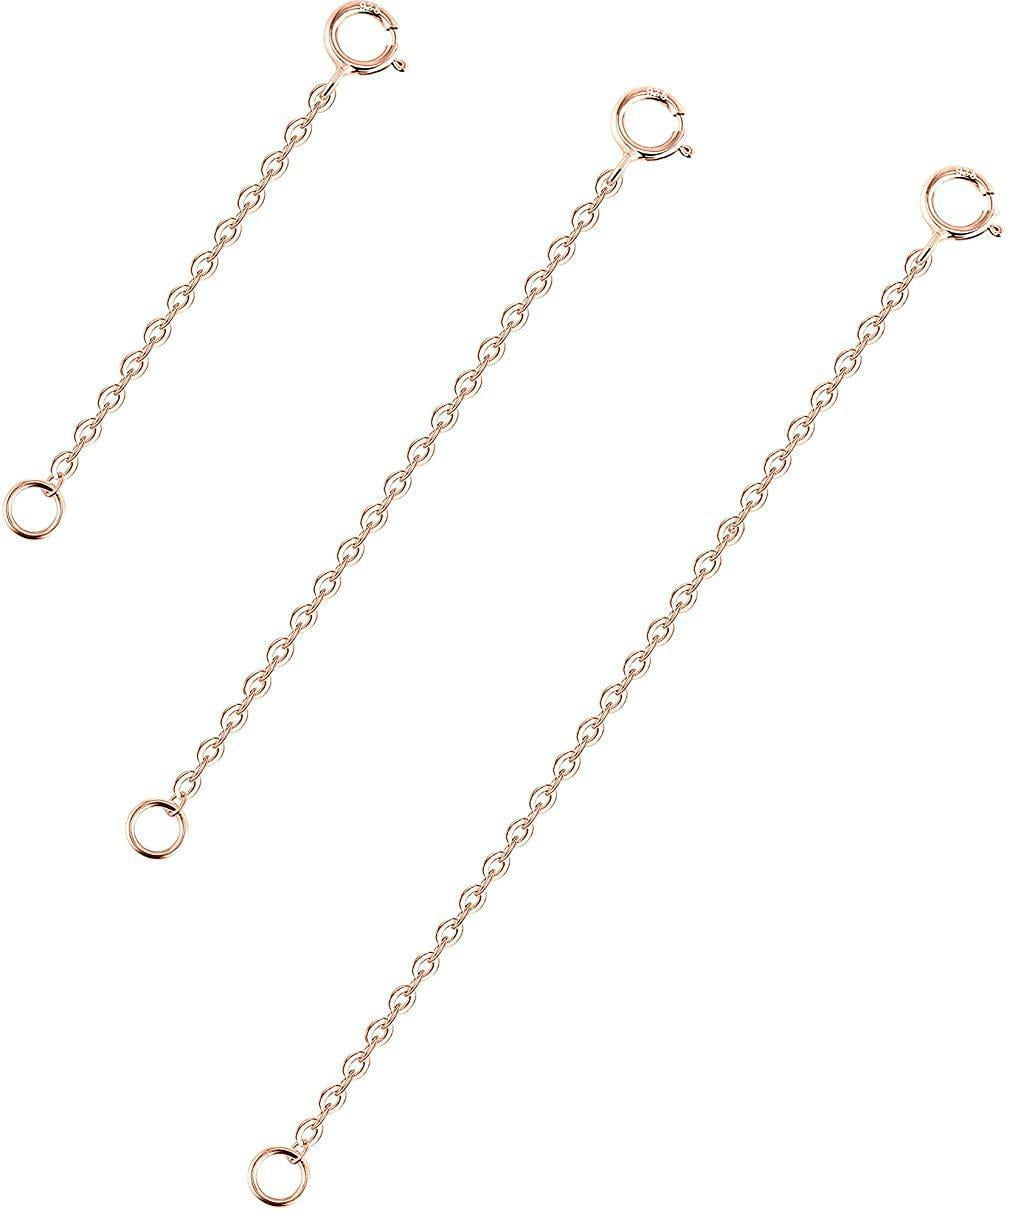  OHINGLT Necklace Extender 10Pcs Chain Extenders for Necklaces  Bracelet,Gold and Silver Plated Extender Chain Necklace Chains for Jewelry  Making : Arts, Crafts & Sewing